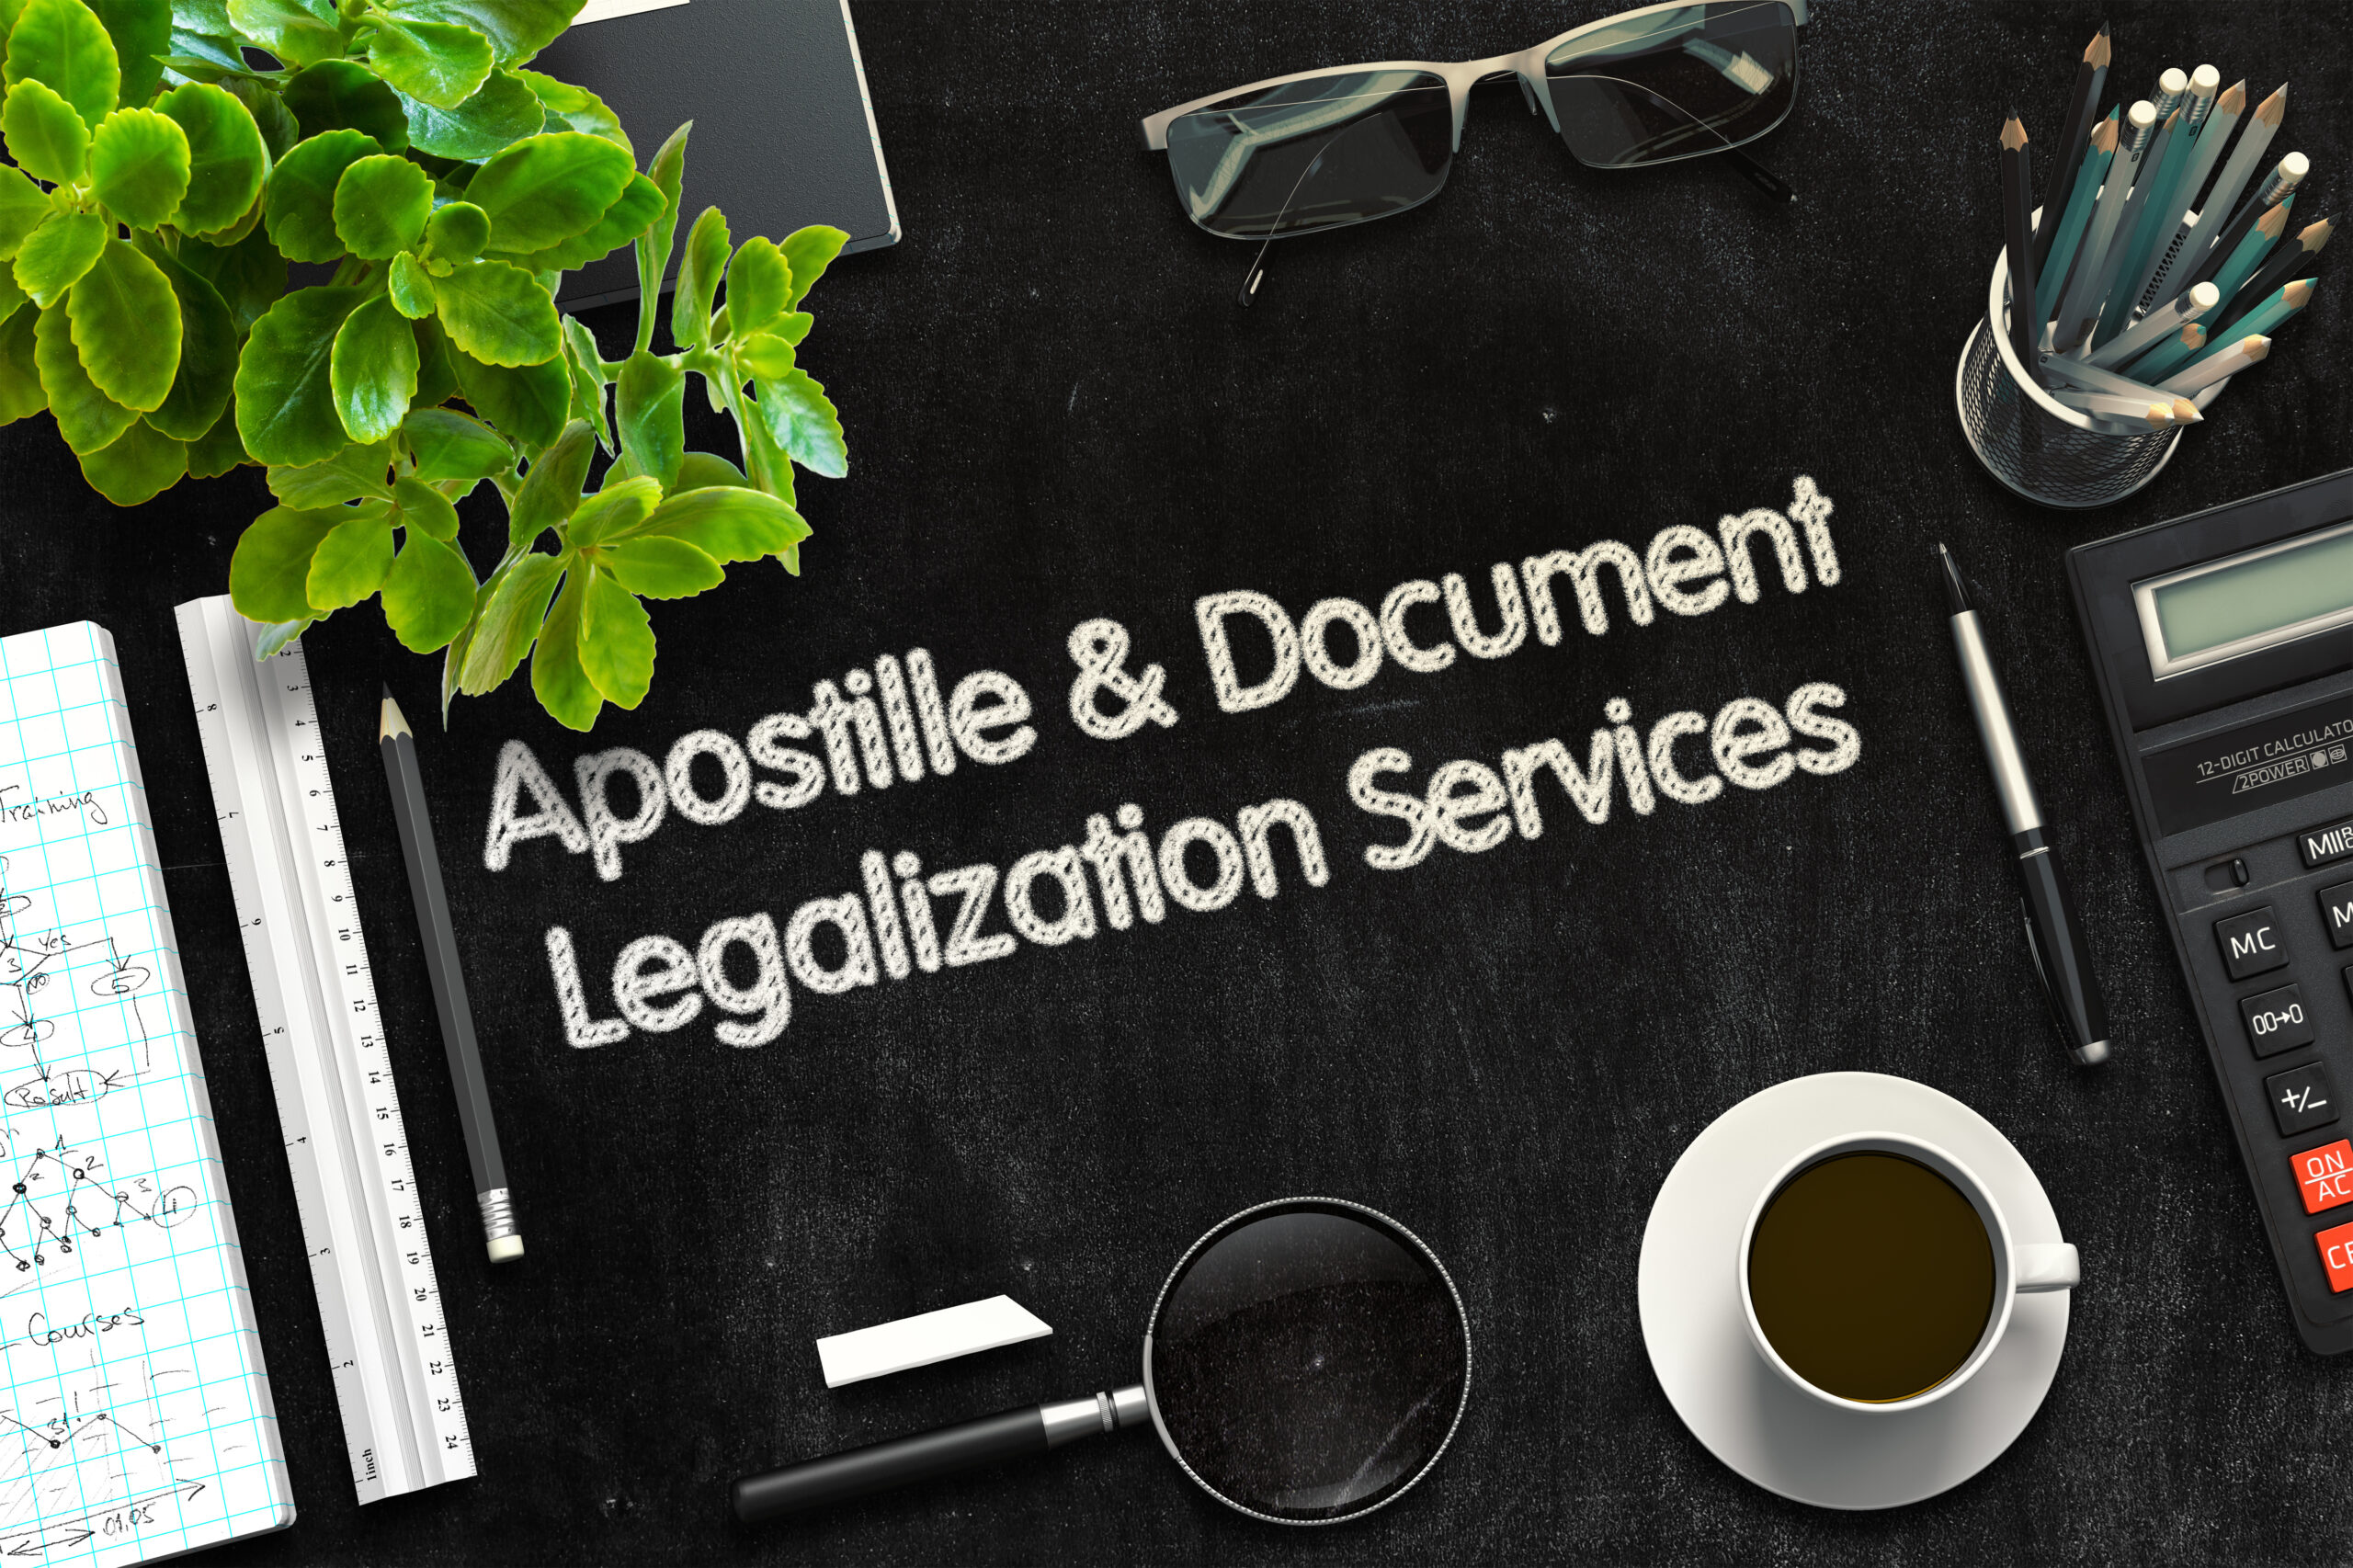 Apostille and Document Legalization Services